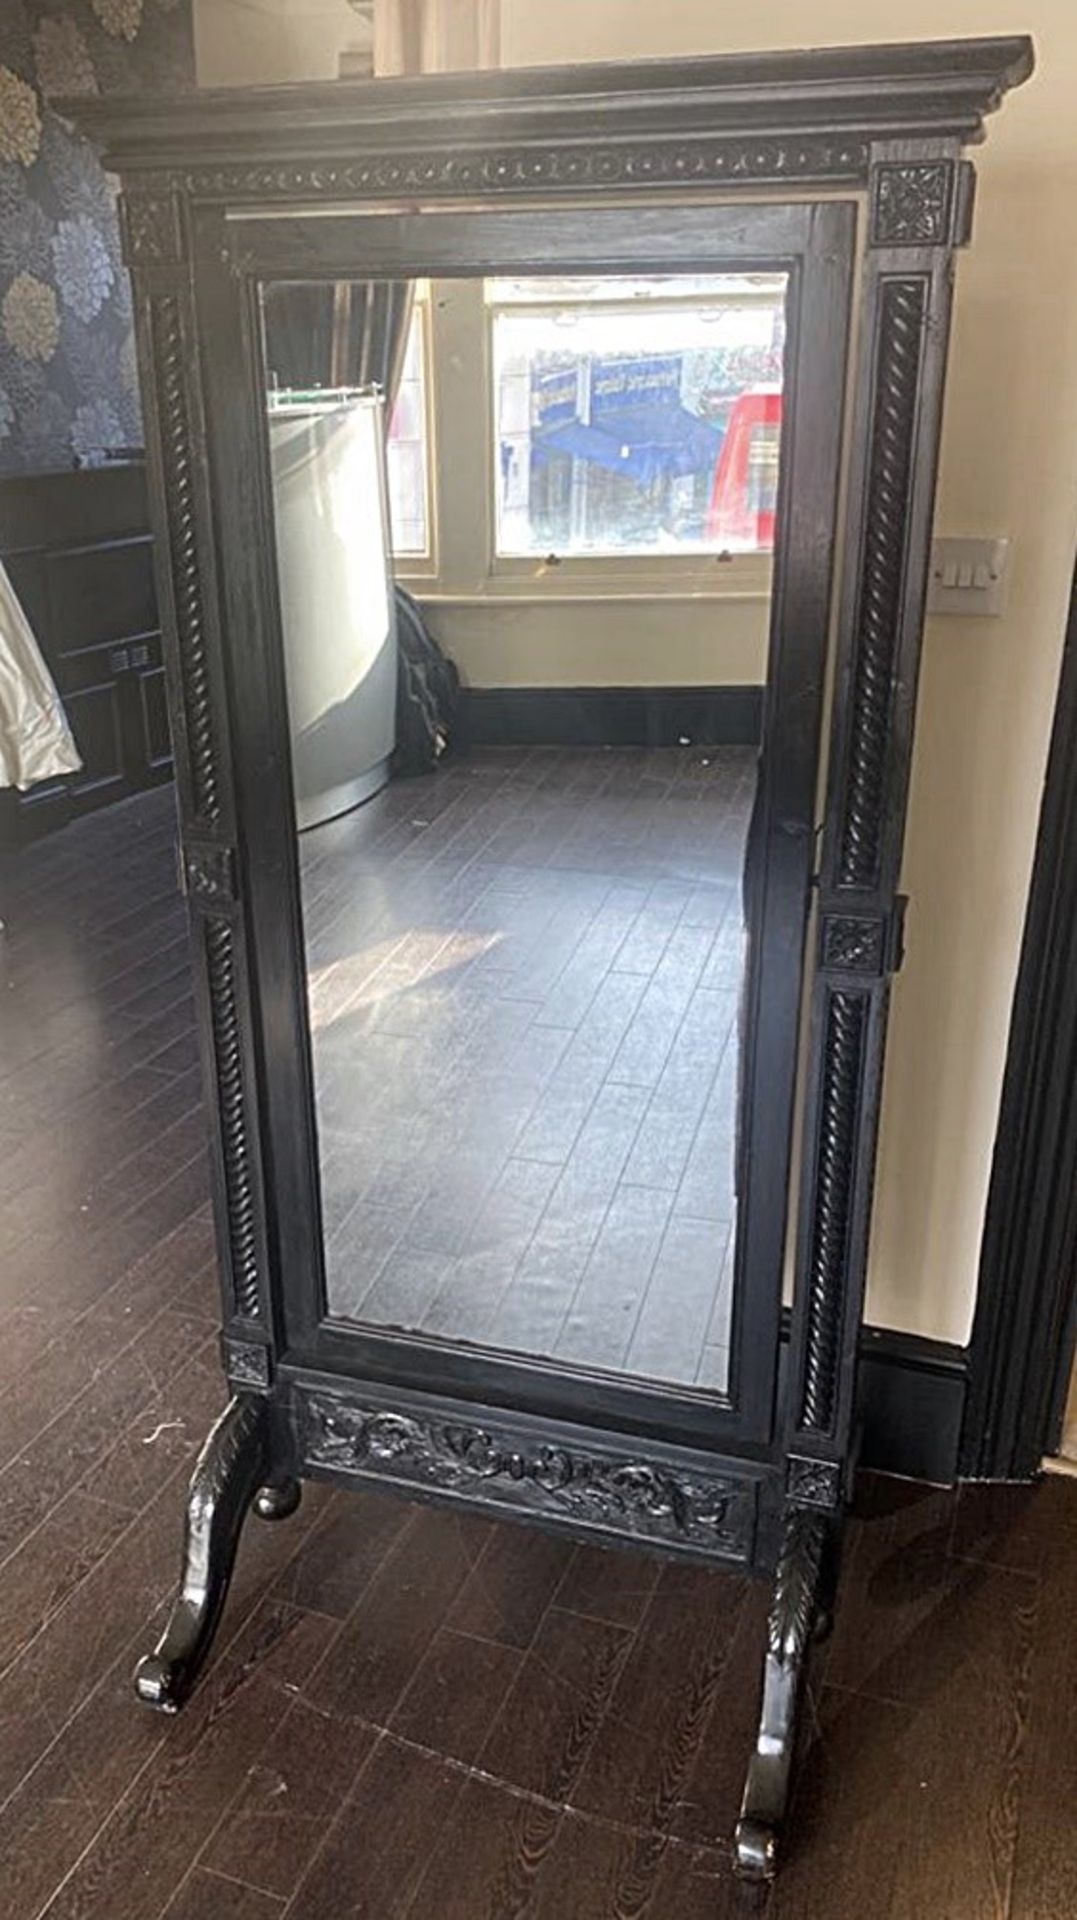 1 x Large Old Jacobean Style Floor Standing Black Mirror With Wonderful Detail - Approx 85x168Cm - - Image 5 of 14